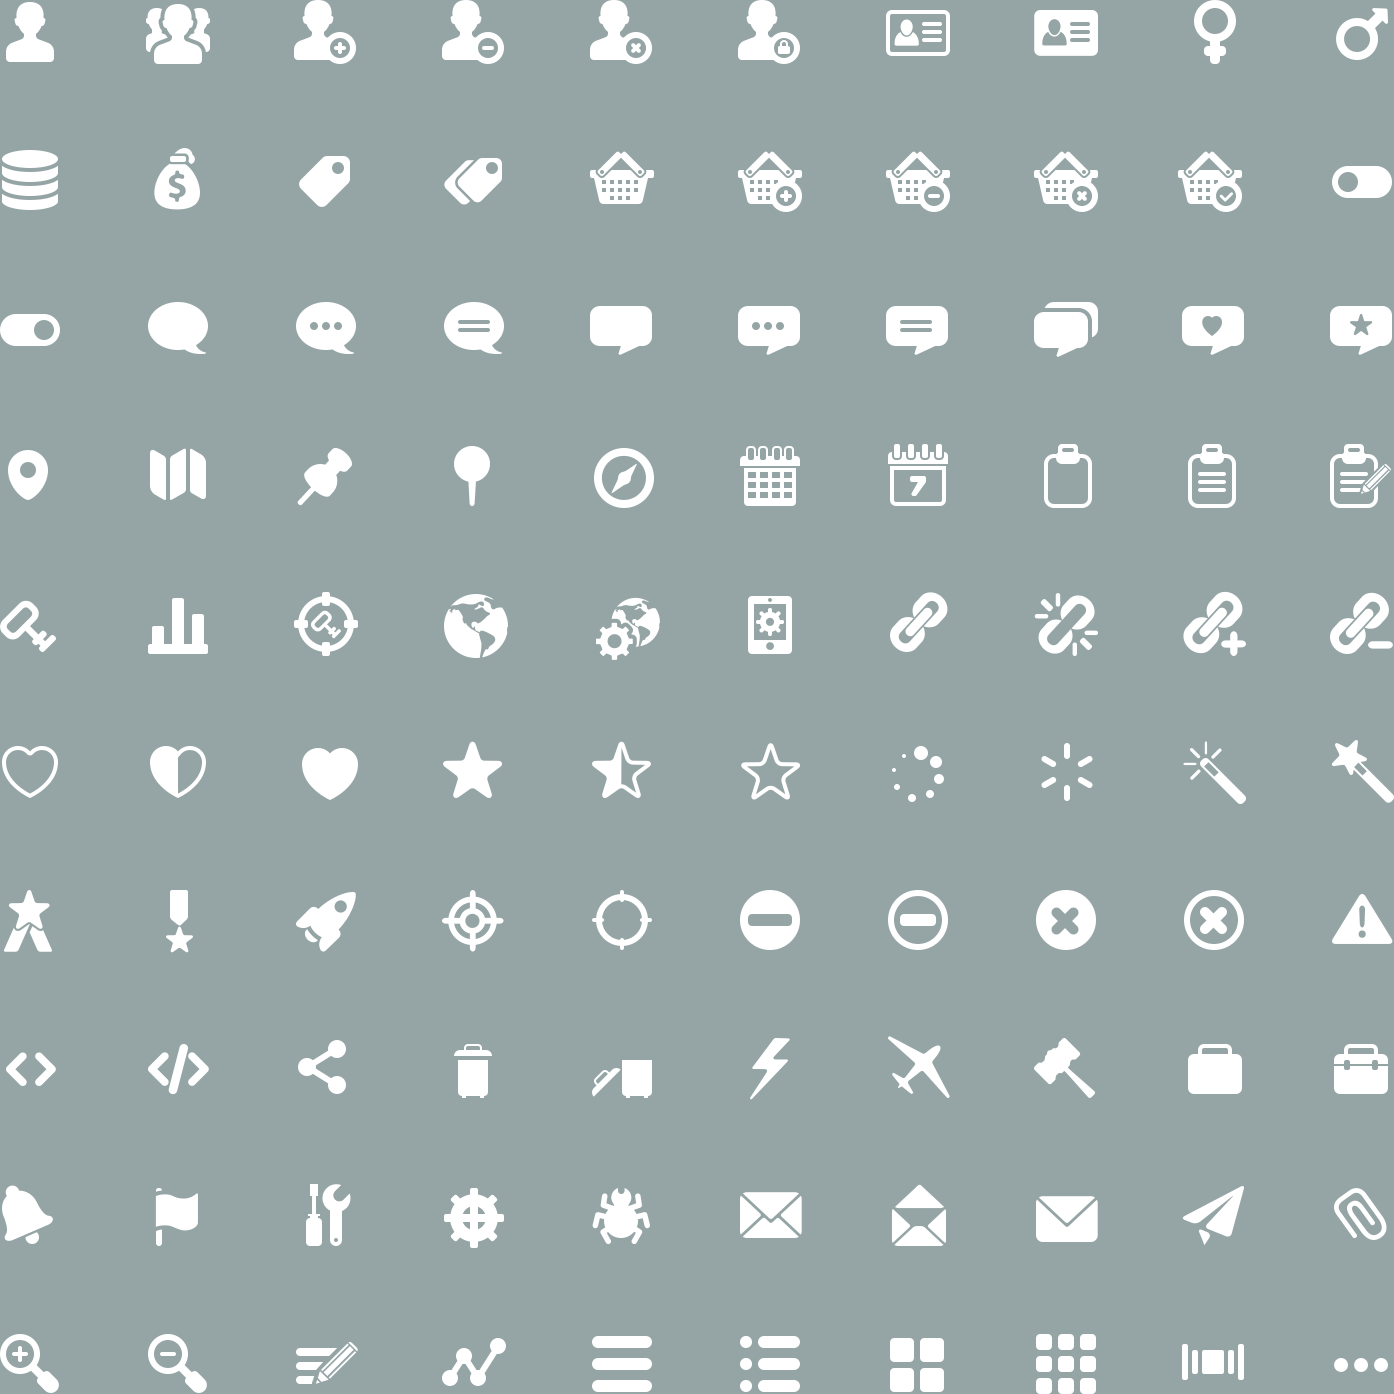 20 Free Web Icon  Glyph Packs for Your UI Designs